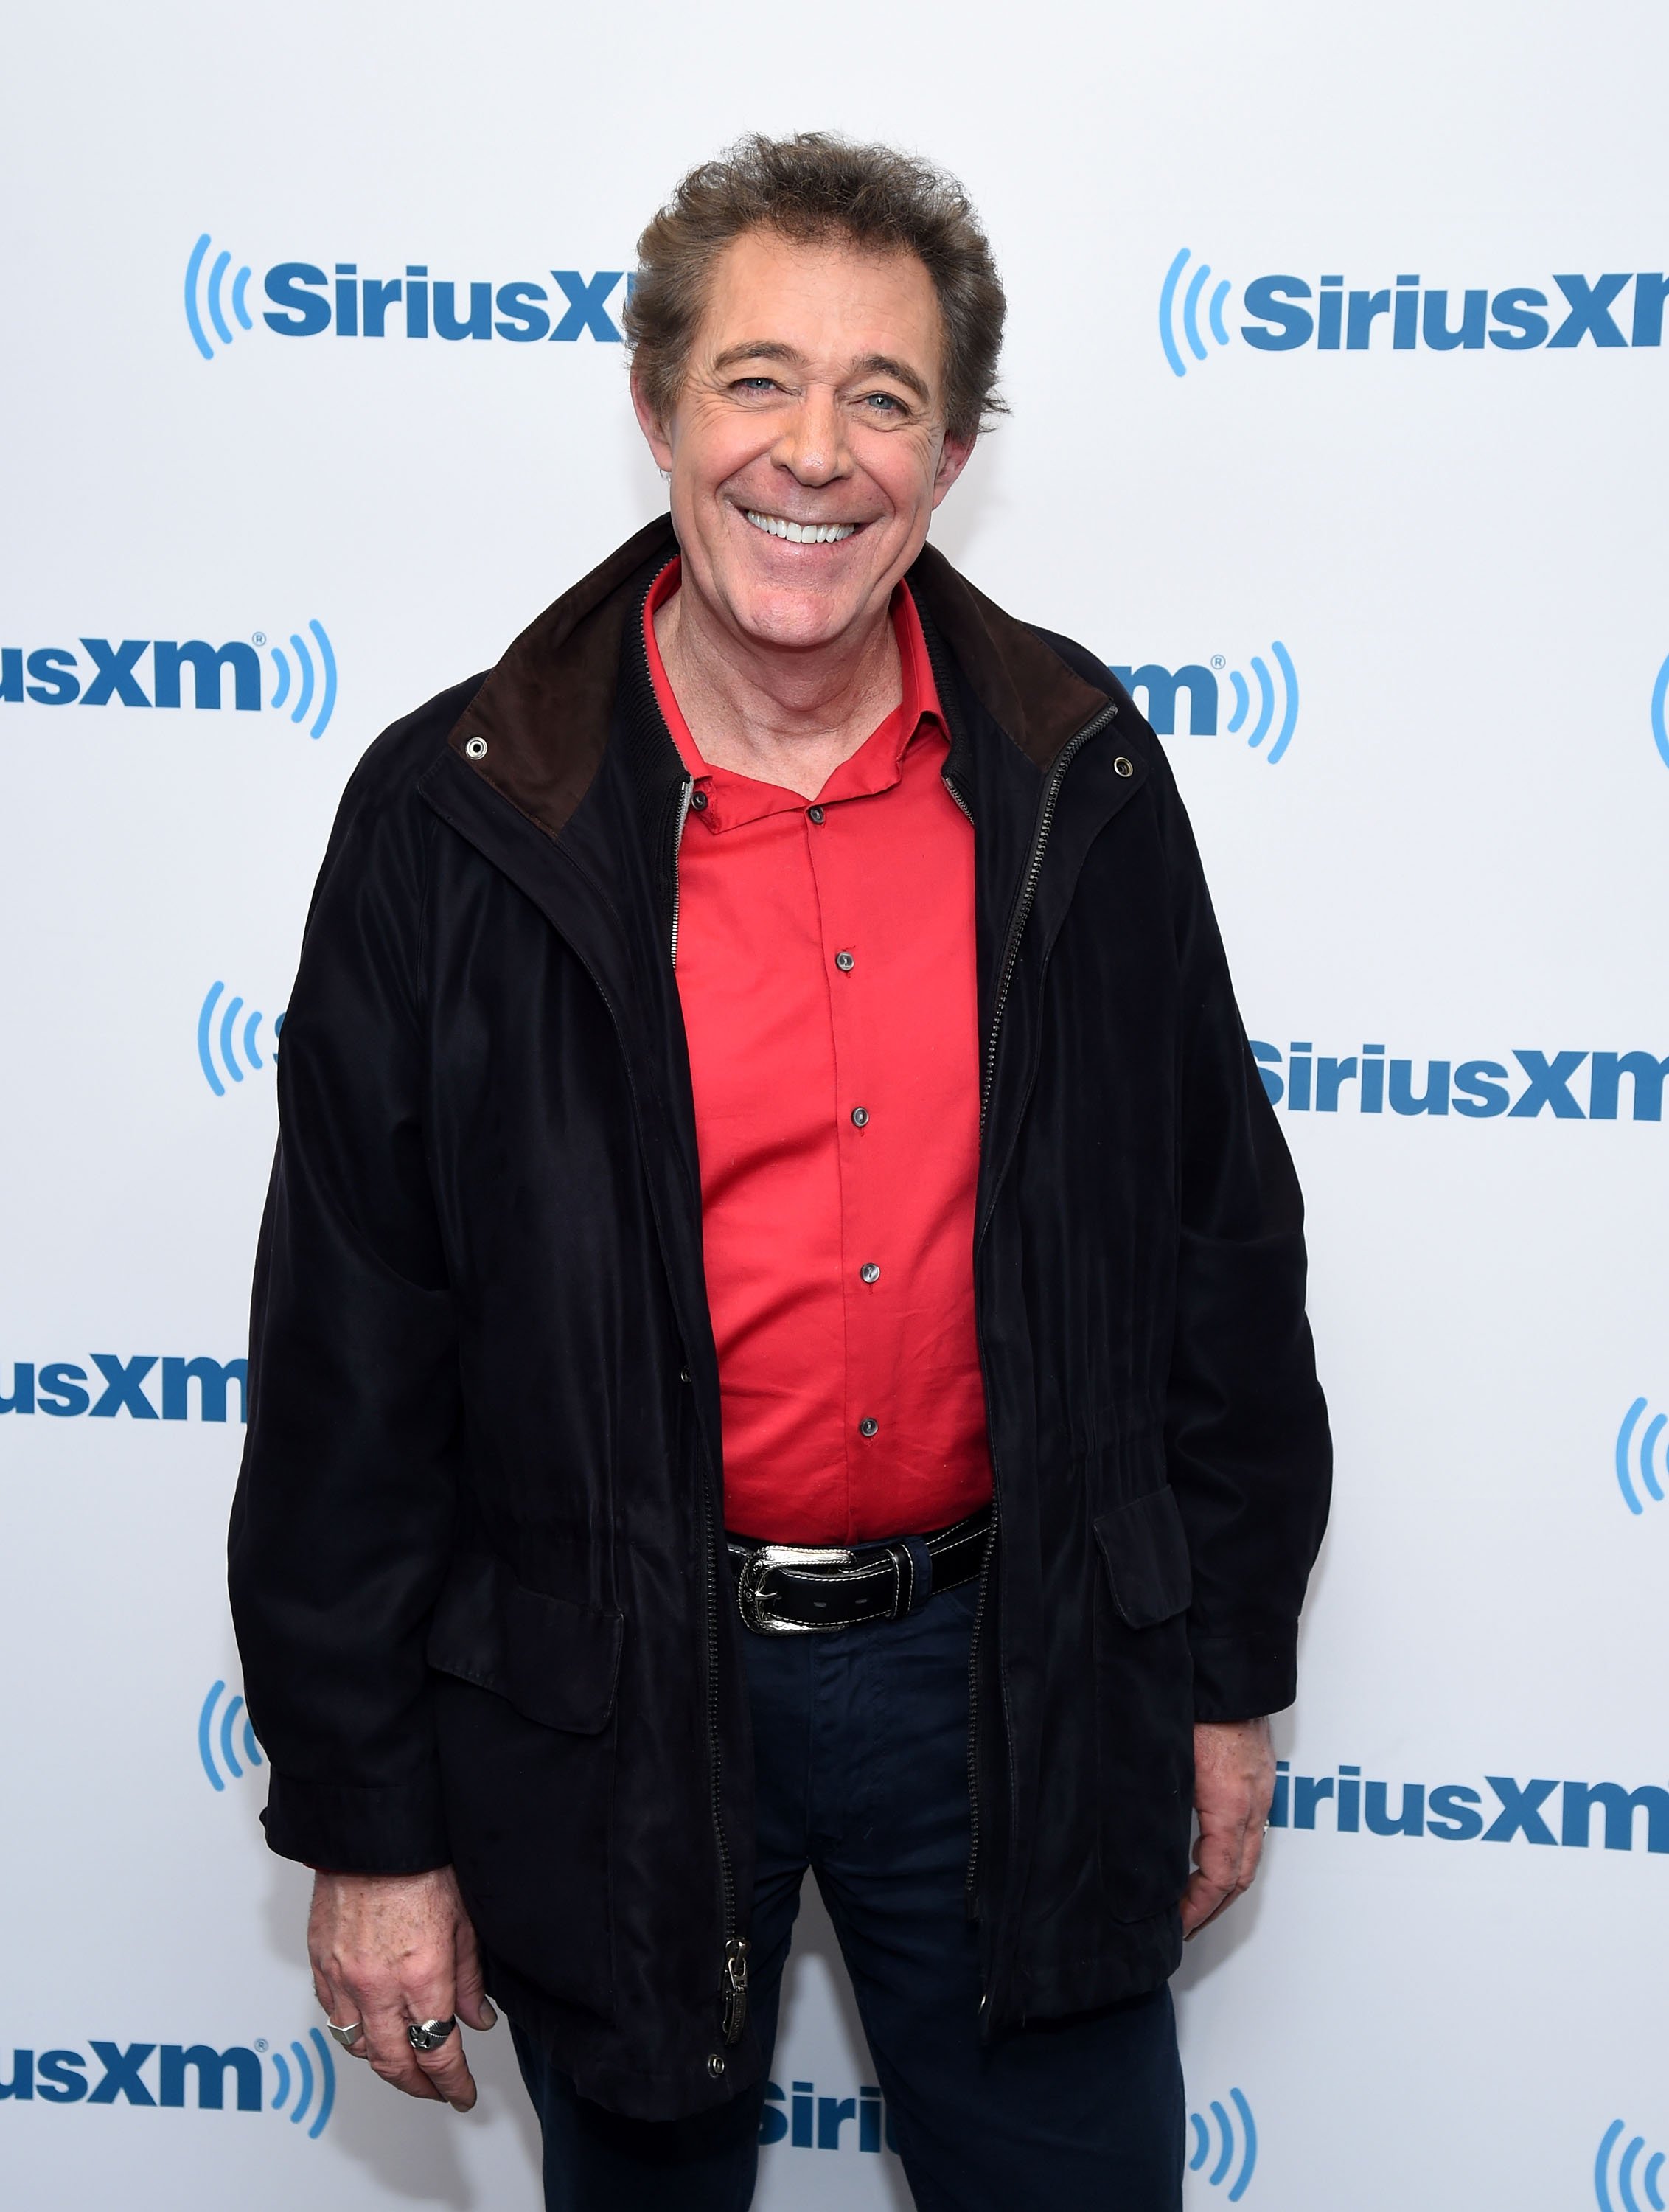  Barry Williams visits the SiriusXM Studios on February 5, 2015 in New York City. | Photo: GettyImages